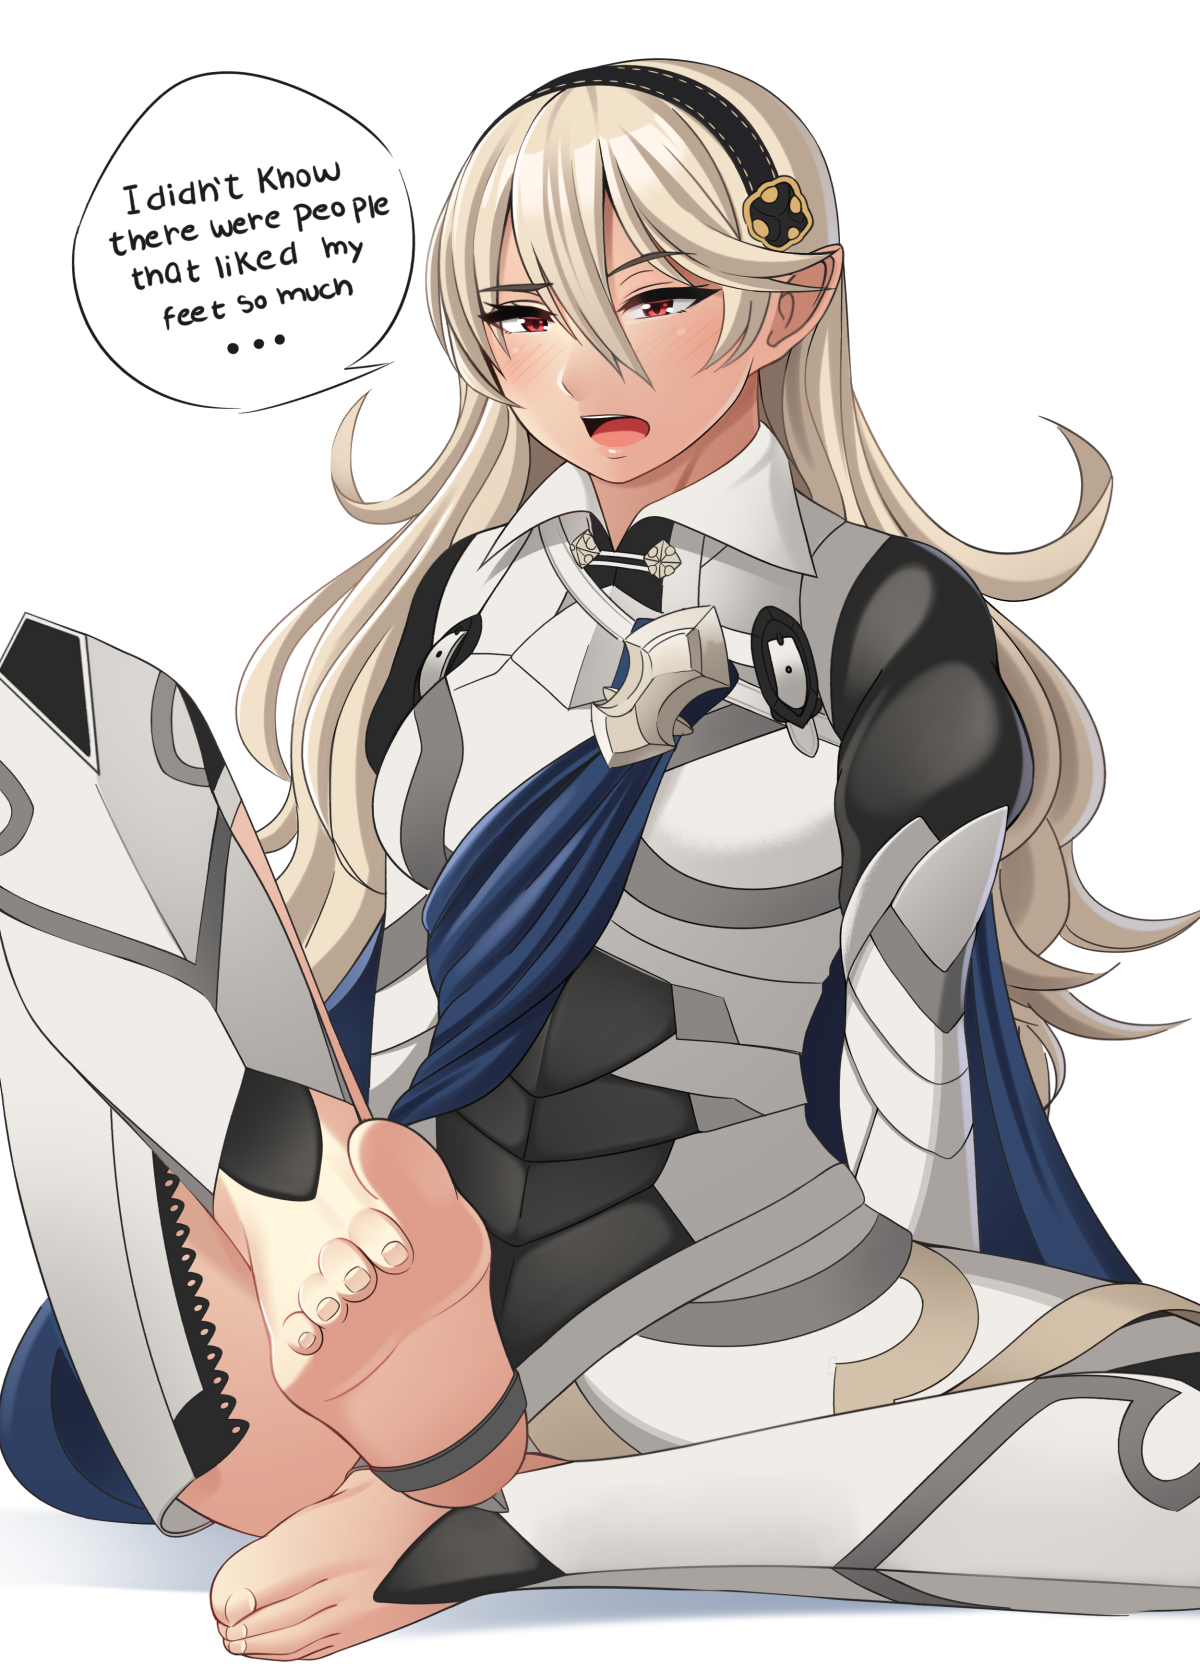 aki-san94:  I’d give big sis Corrin a foot massage and even more :3 Back me up